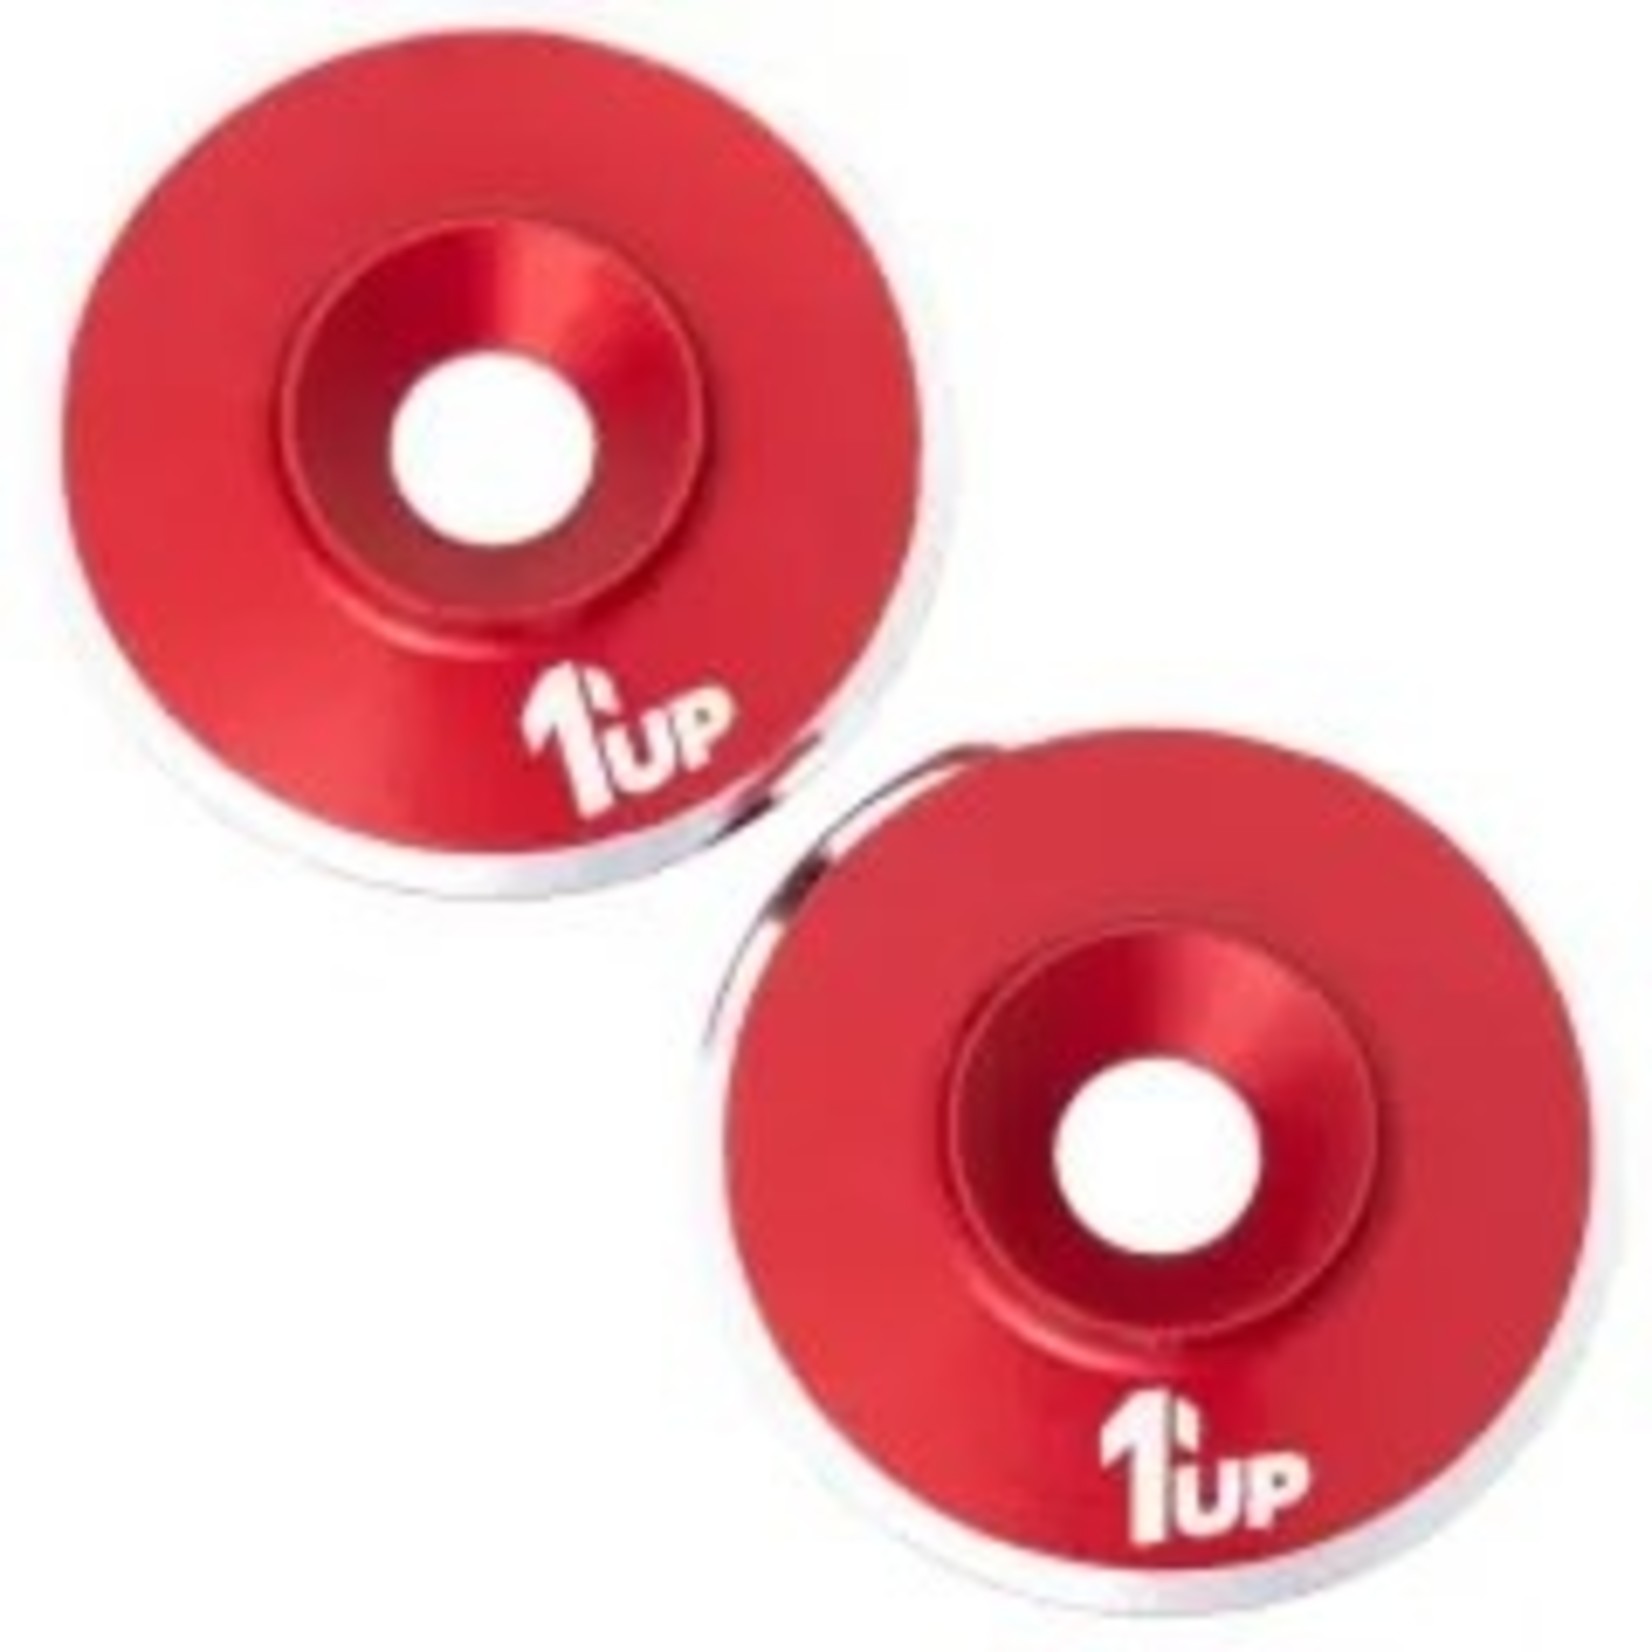 1UP 1UP820521 1Up Racing 7075 LowPro Wing Washers - M3 - 2pcs - Red Shine